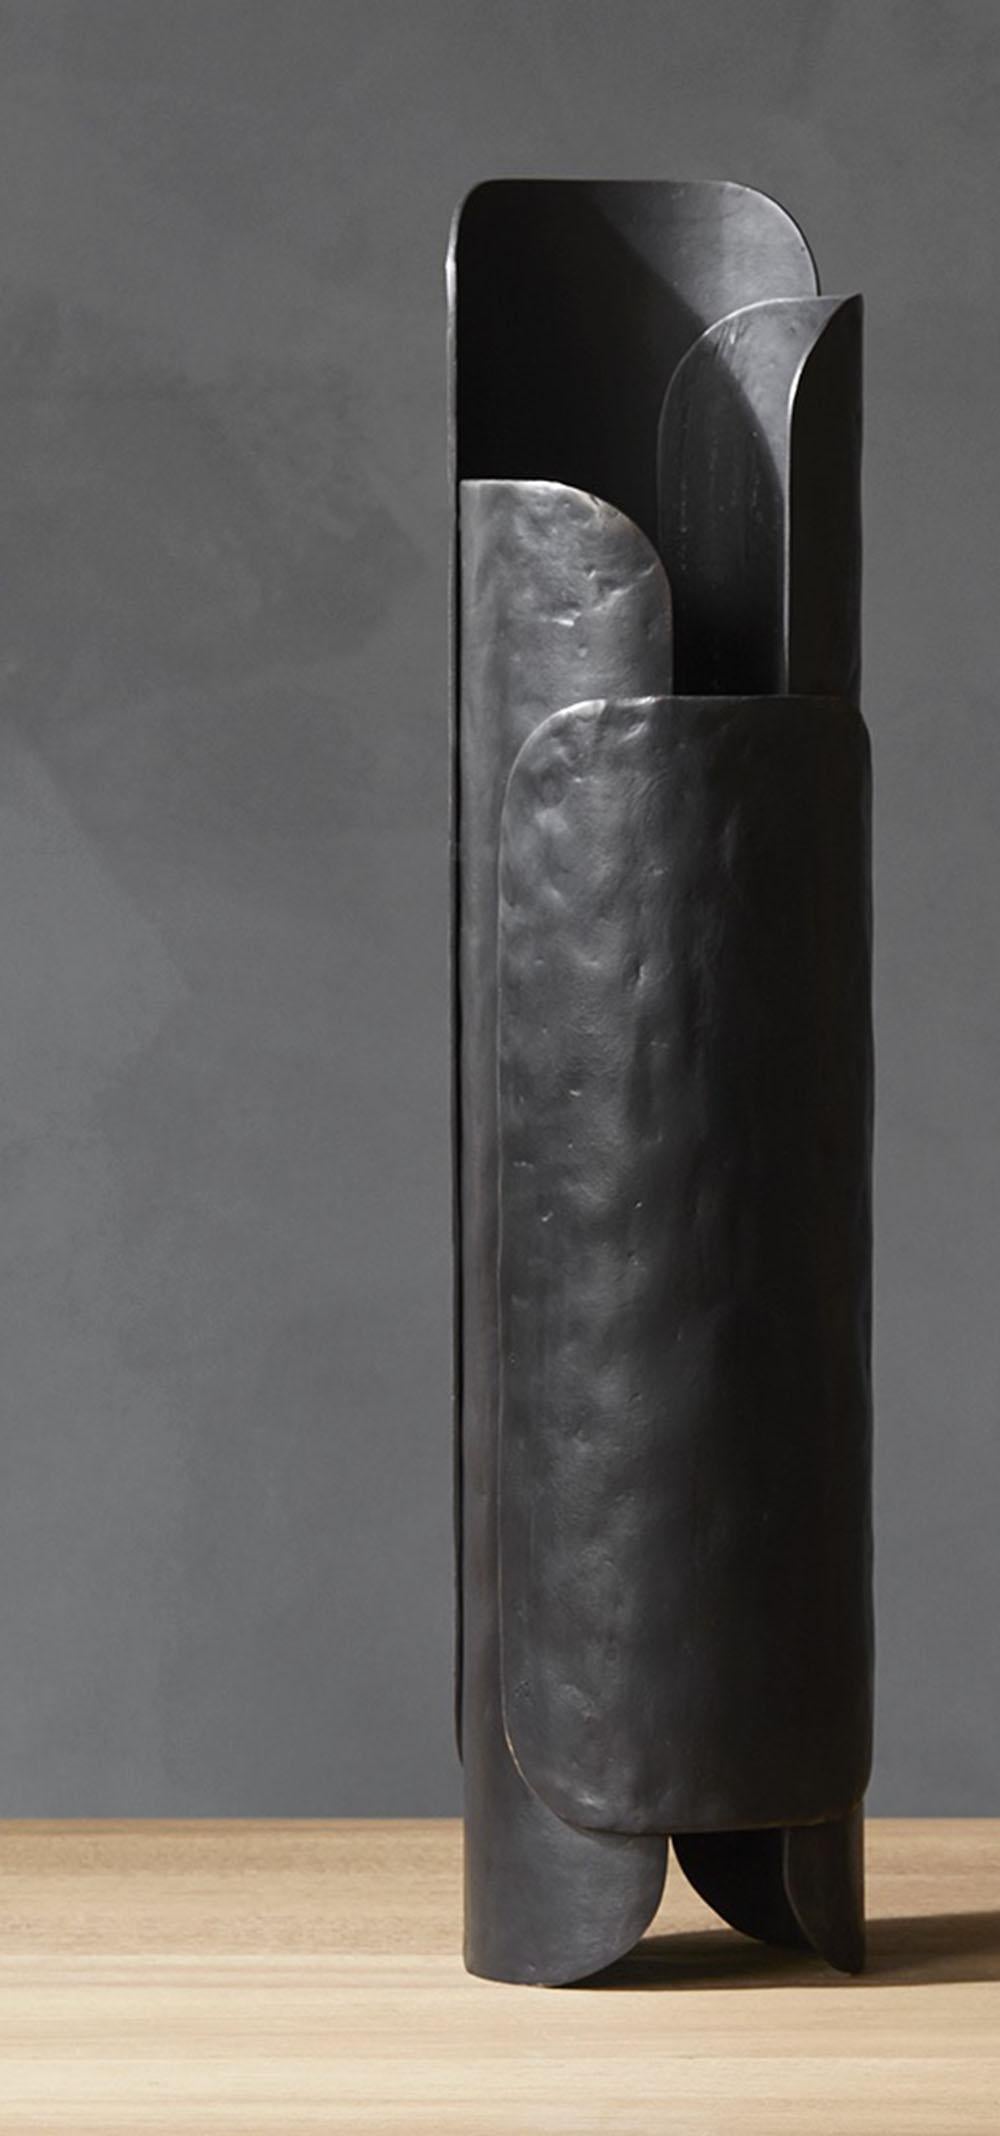 Designed by Dan Yeffet for Collection Particulière, Leaf is an elegant vase made of black patinated bronze with insert in stainless steel.
Dimensions: vase (tall) : Ø 20 x h 77 cm (insert : Ø 16 x h 36 cm)
Materials : bronze / stainless steel